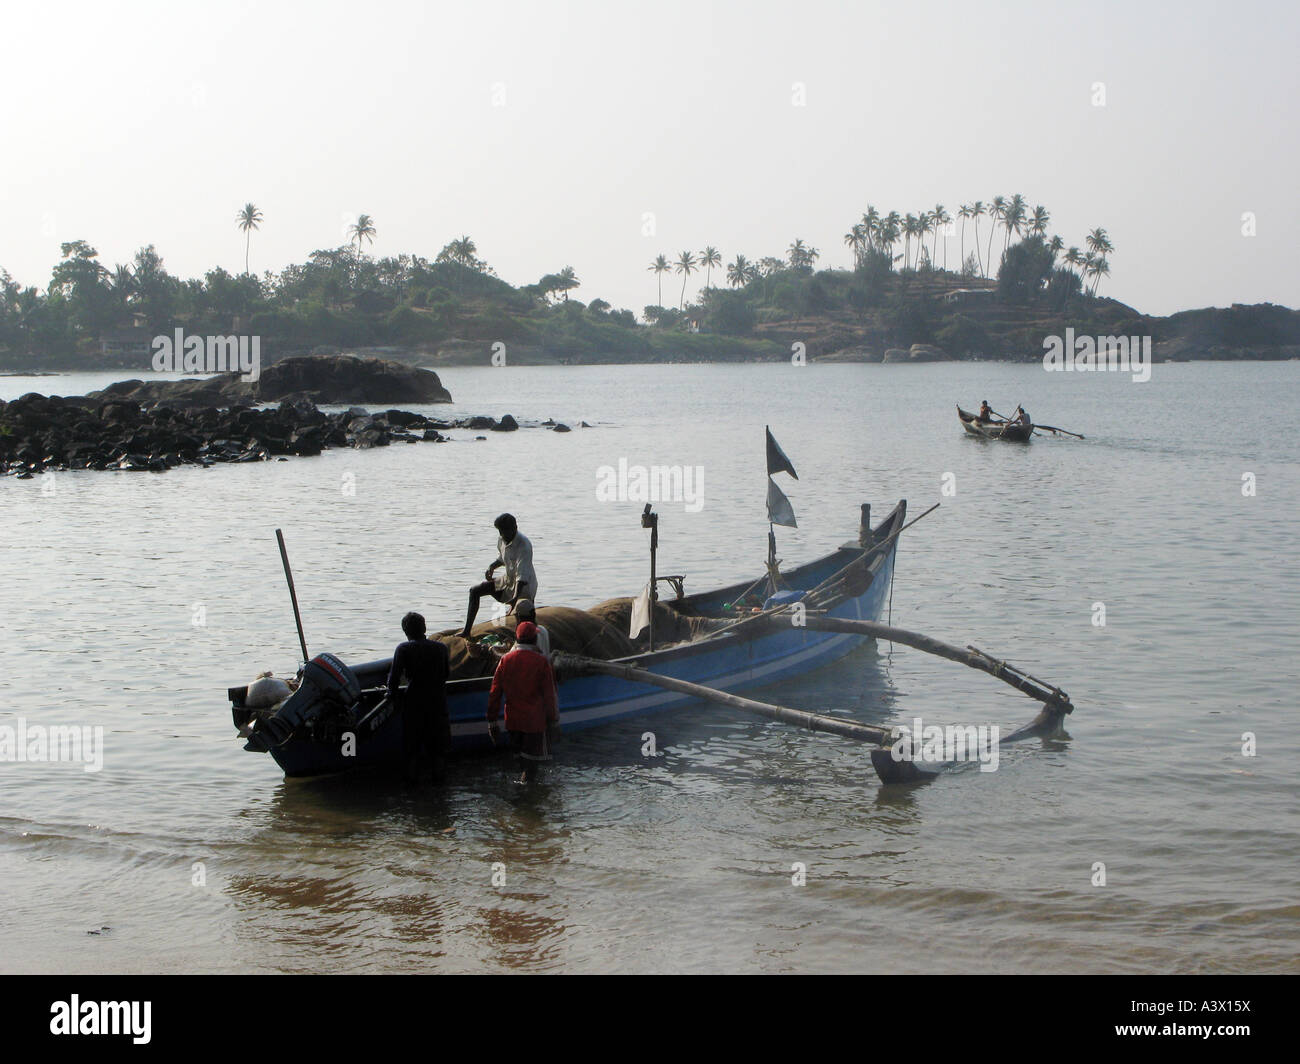 India Fishermen Going Out To Sea In Goa Photo Julio Etchart Stock